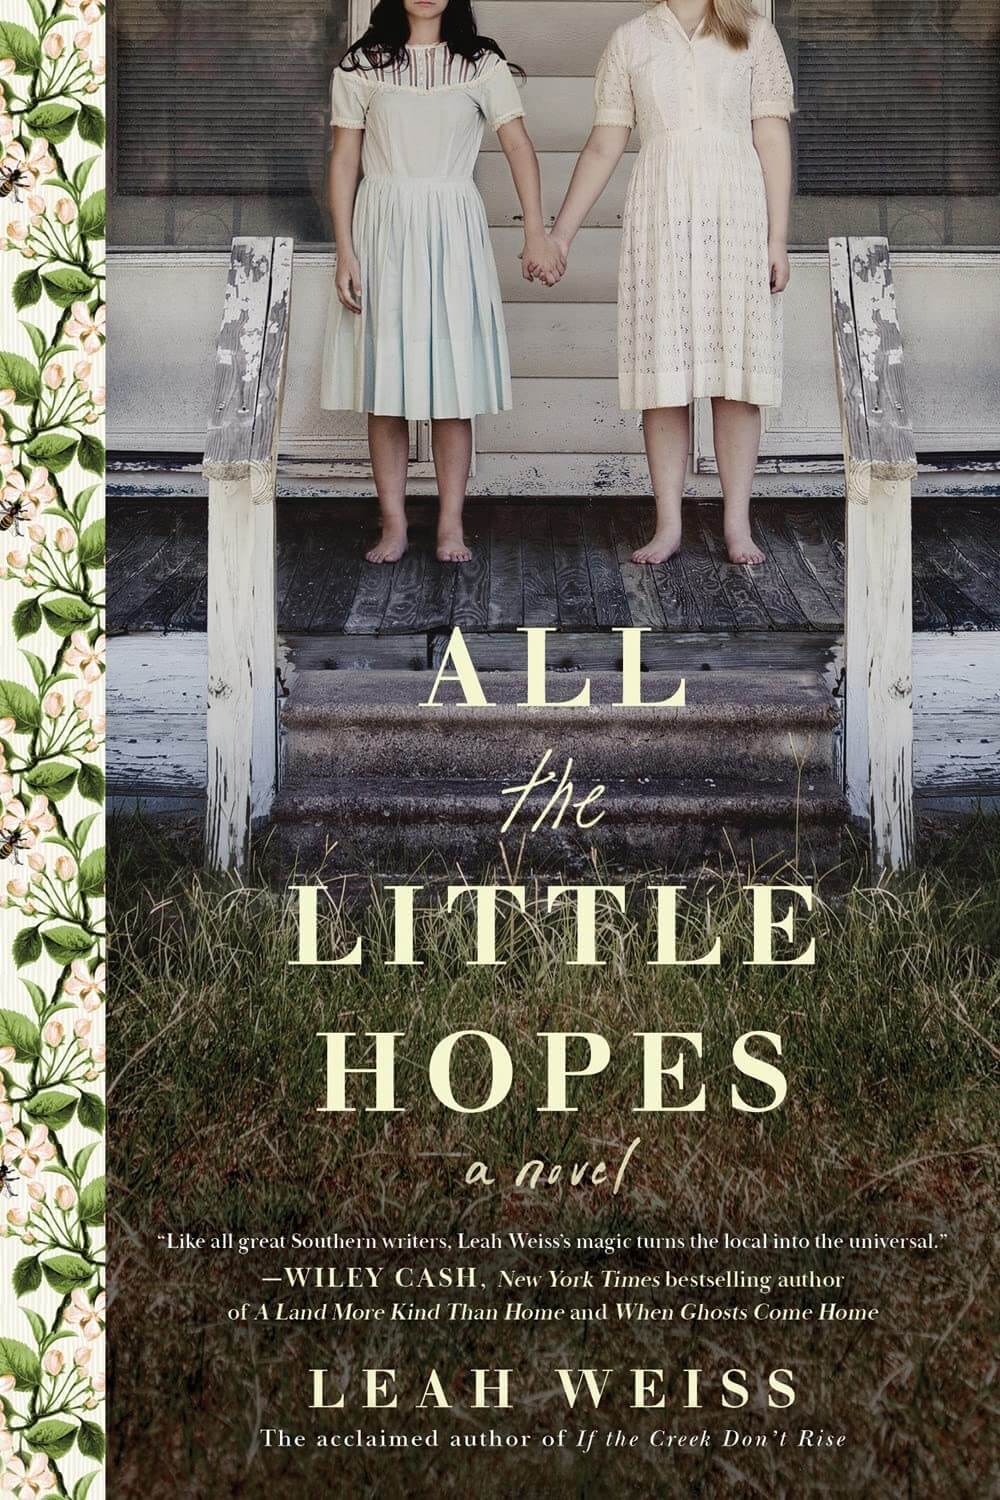 The book "All The Little Hopes"